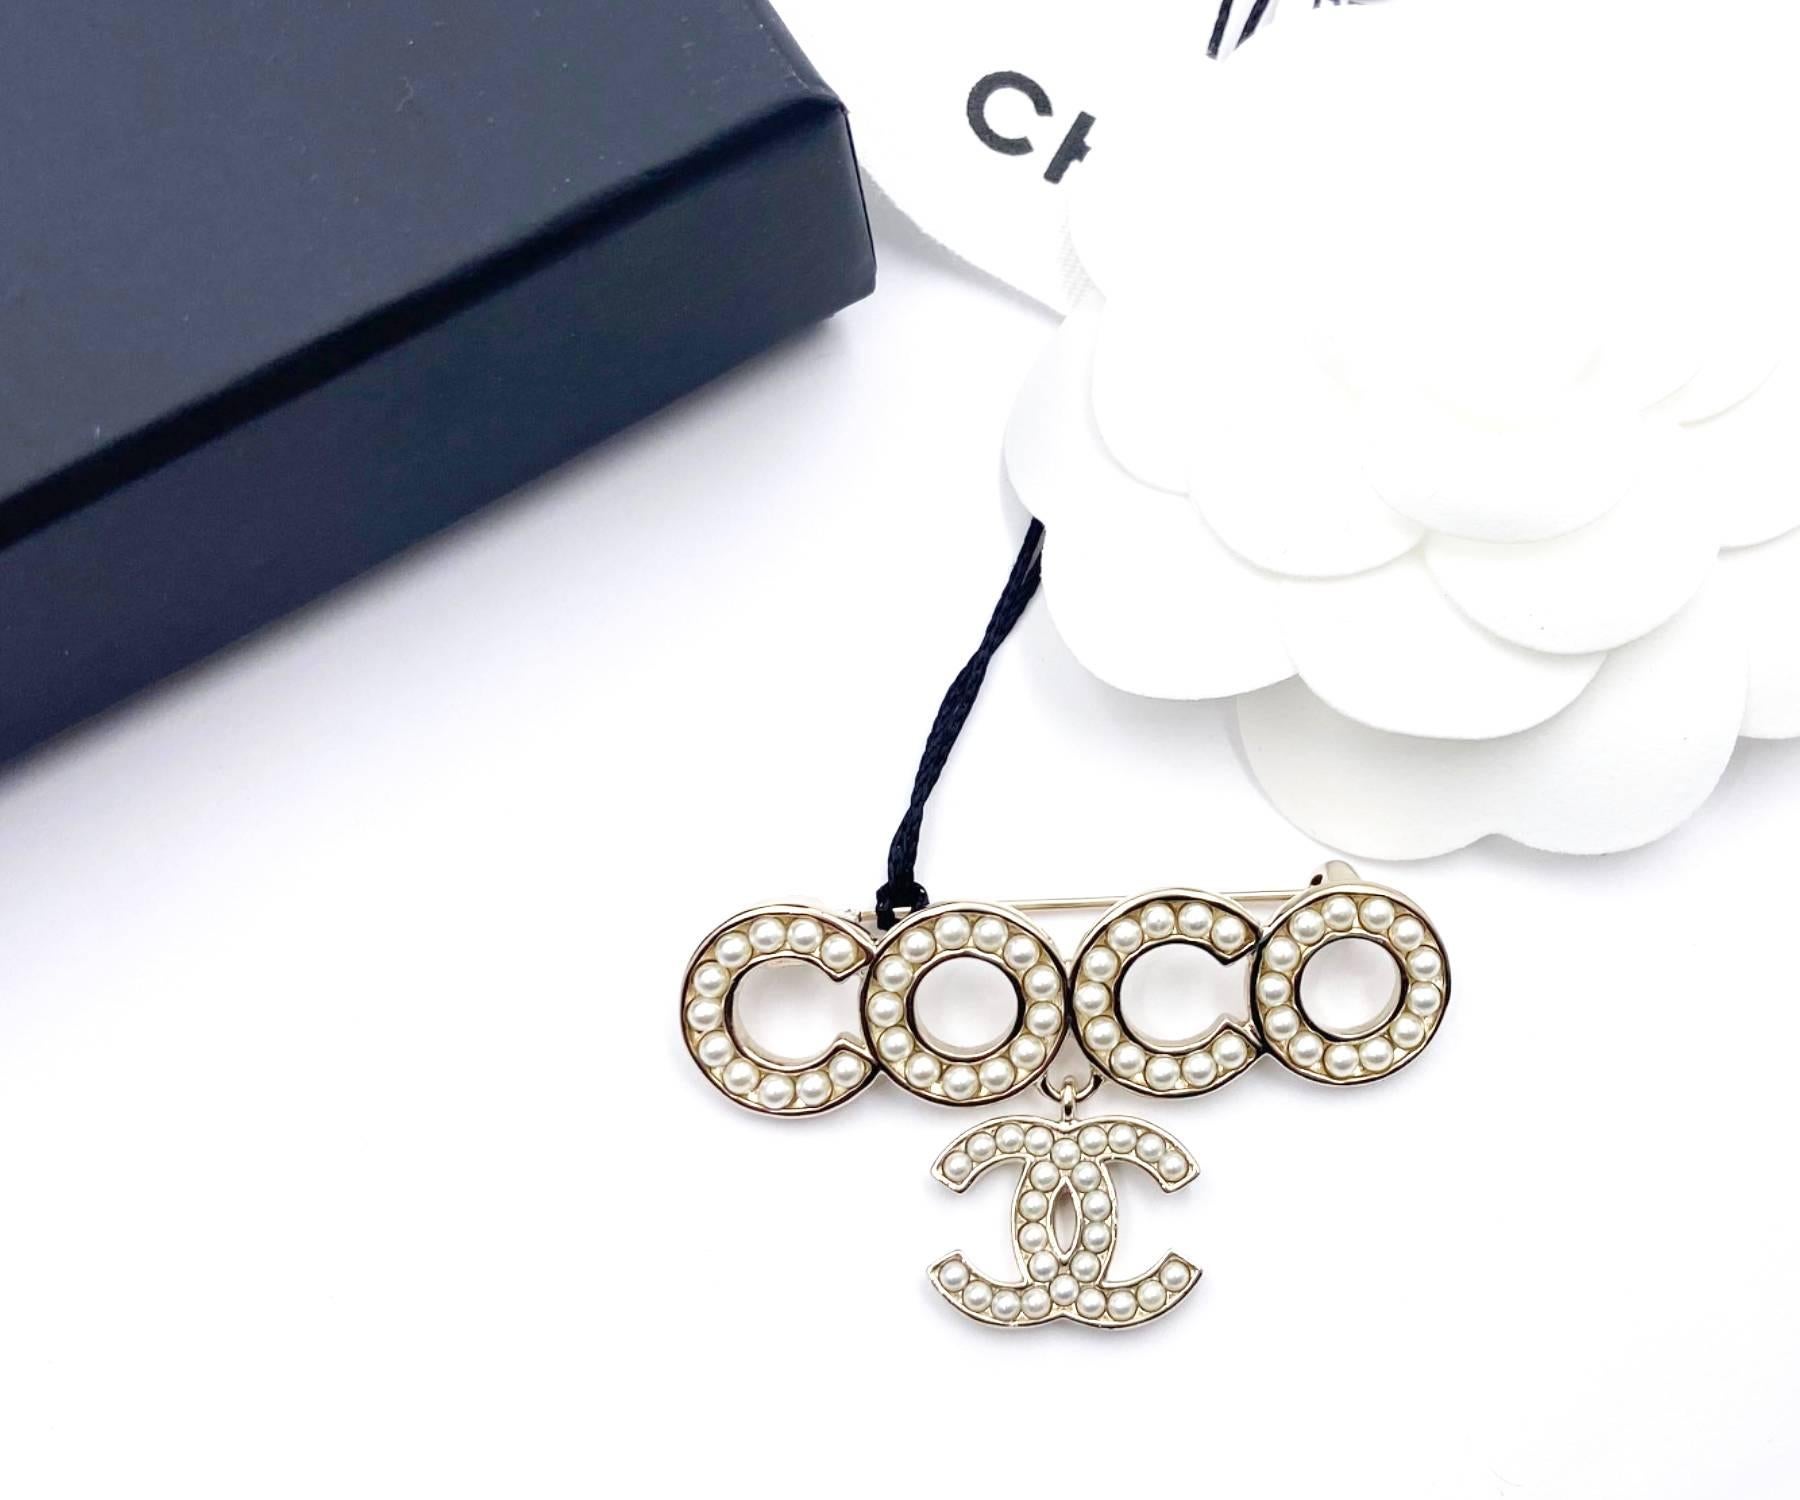 Chanel Brand New Gold CC Cocobana Pearl Dangle Brooch

*Marked 21
*Made in Italy
*Comes with original box, pouch, booklet, tag, ribbon and camellia
*Brand New

-Approximately 1.2″ x 2.1″
-Very pretty and classic

13135-6231

